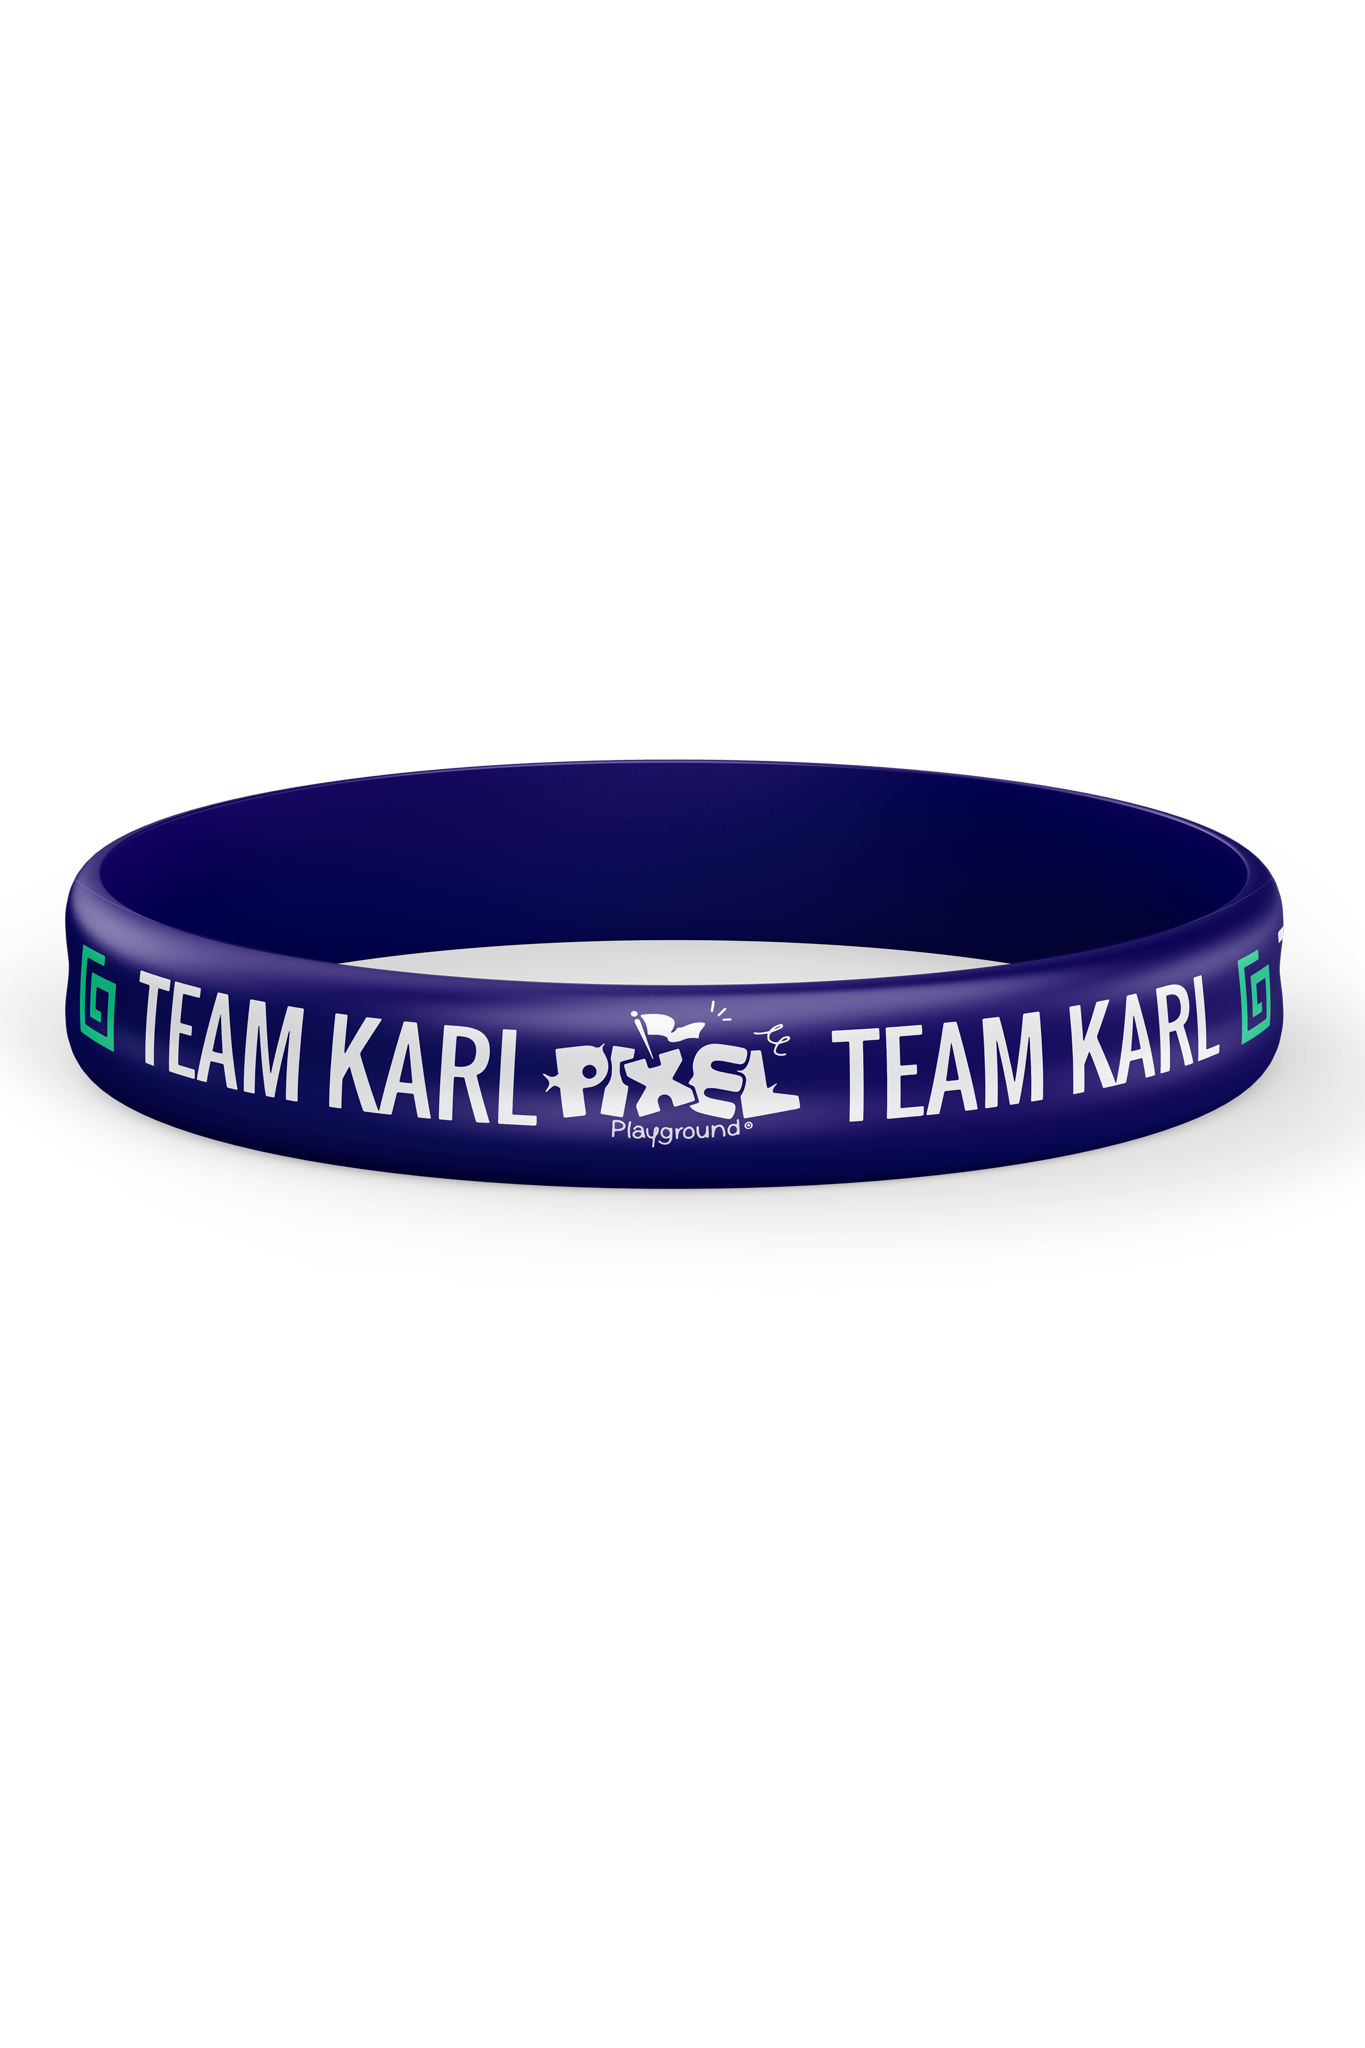 Purple wristband with 'TEAM KARL' text and Pixel Playground logo.